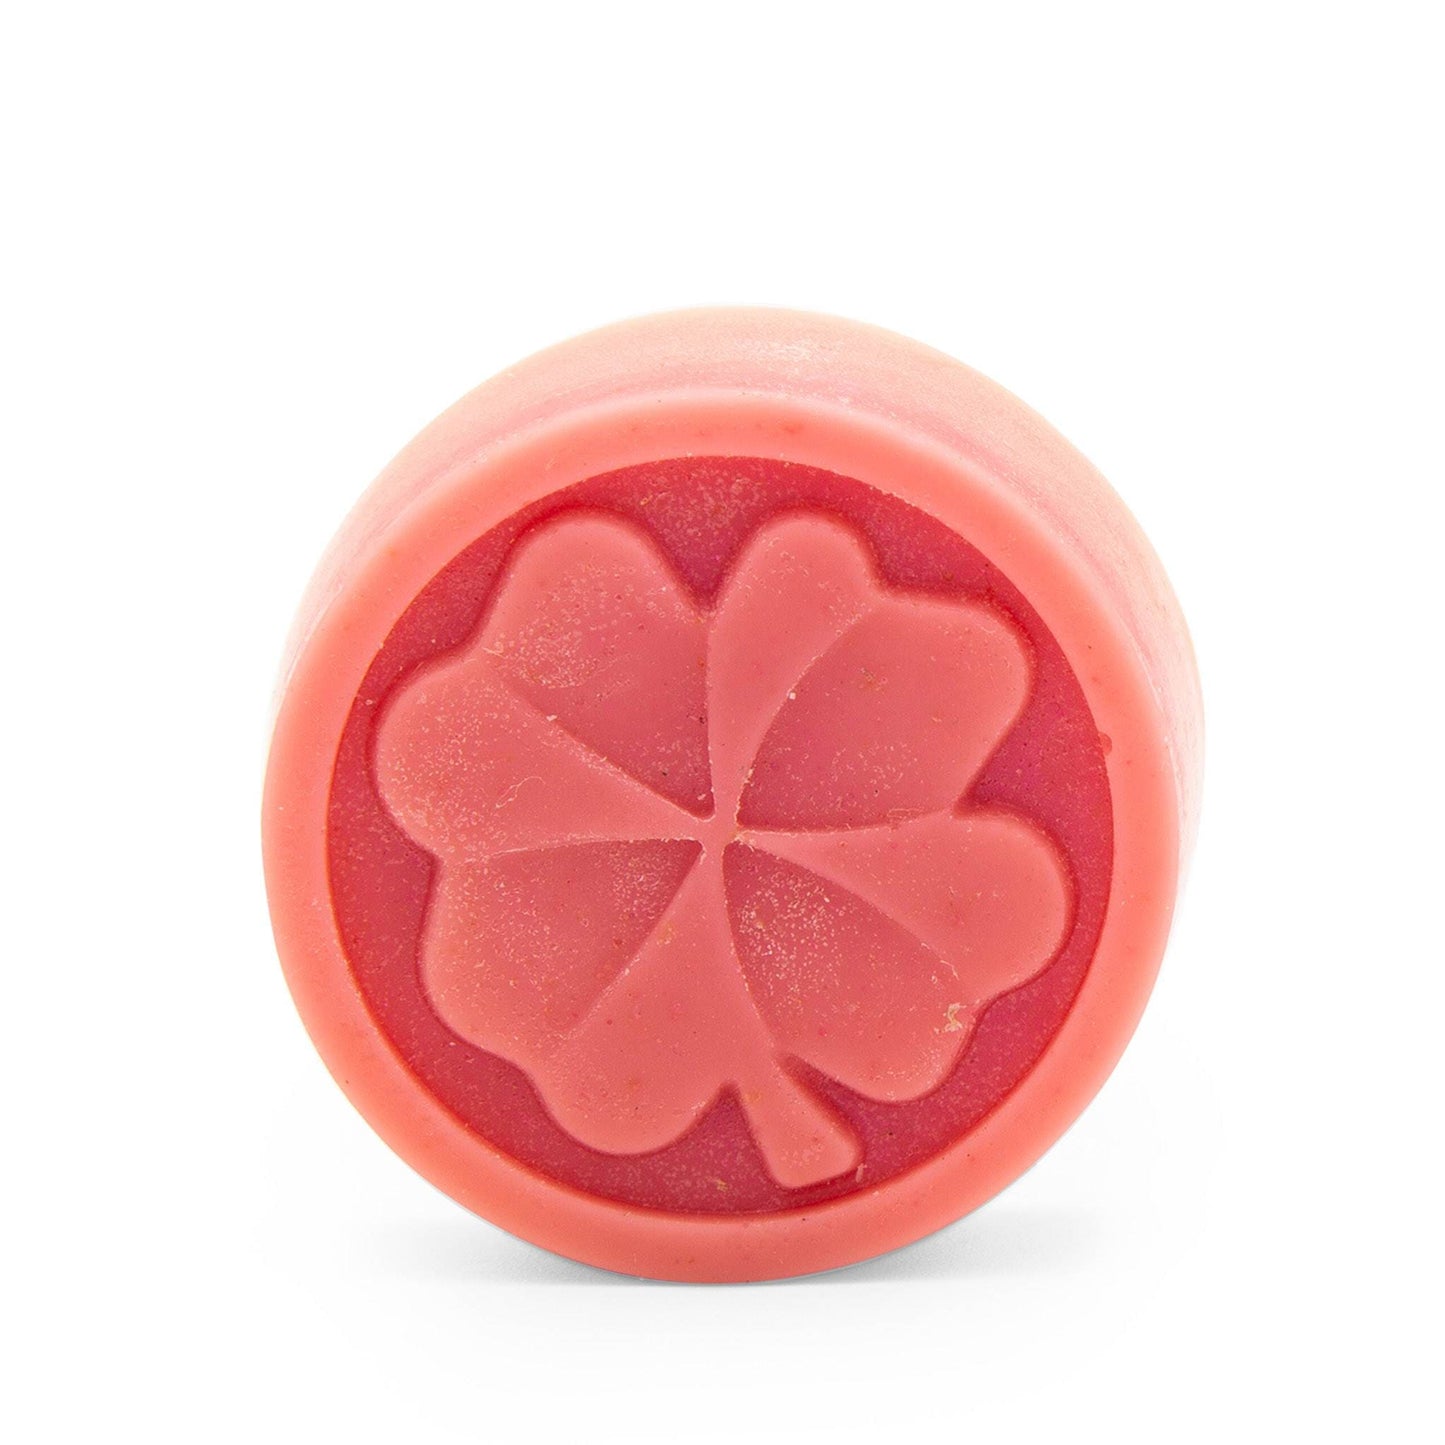 Janni Bars Conditioner Hair Repair Conditioner Bar with Pink Grapefruit, Raspberry Seed Oil & Plant Keratin - Janni Bars